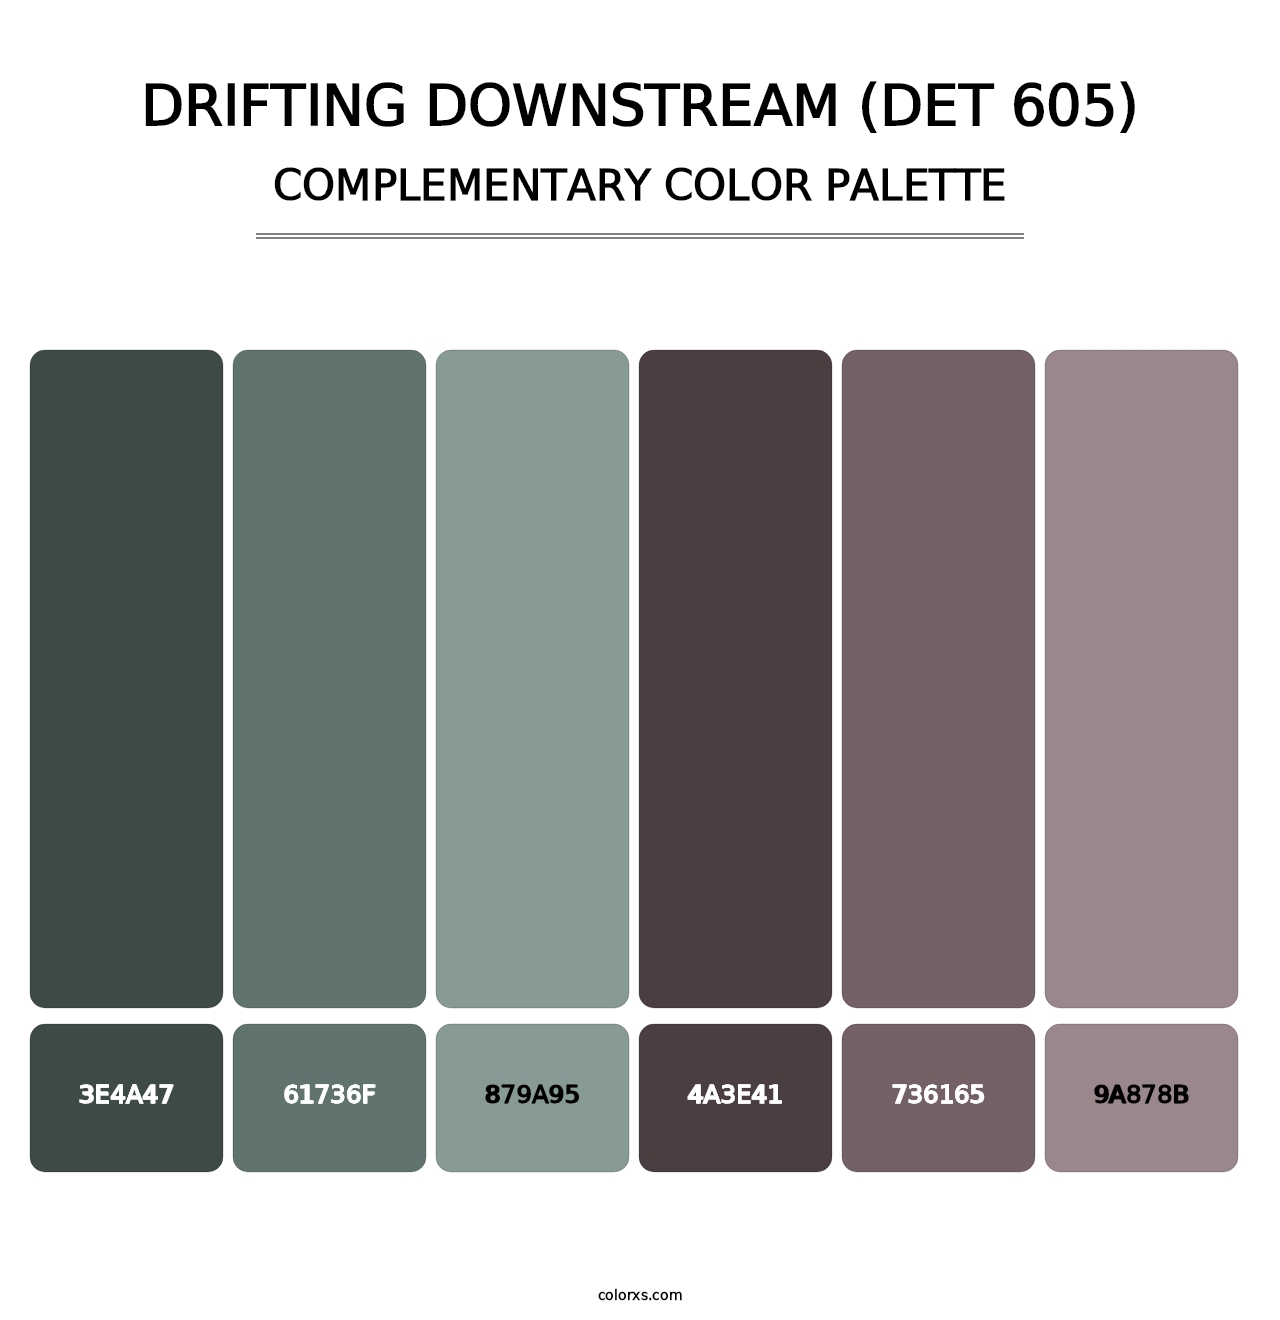 Drifting Downstream (DET 605) - Complementary Color Palette